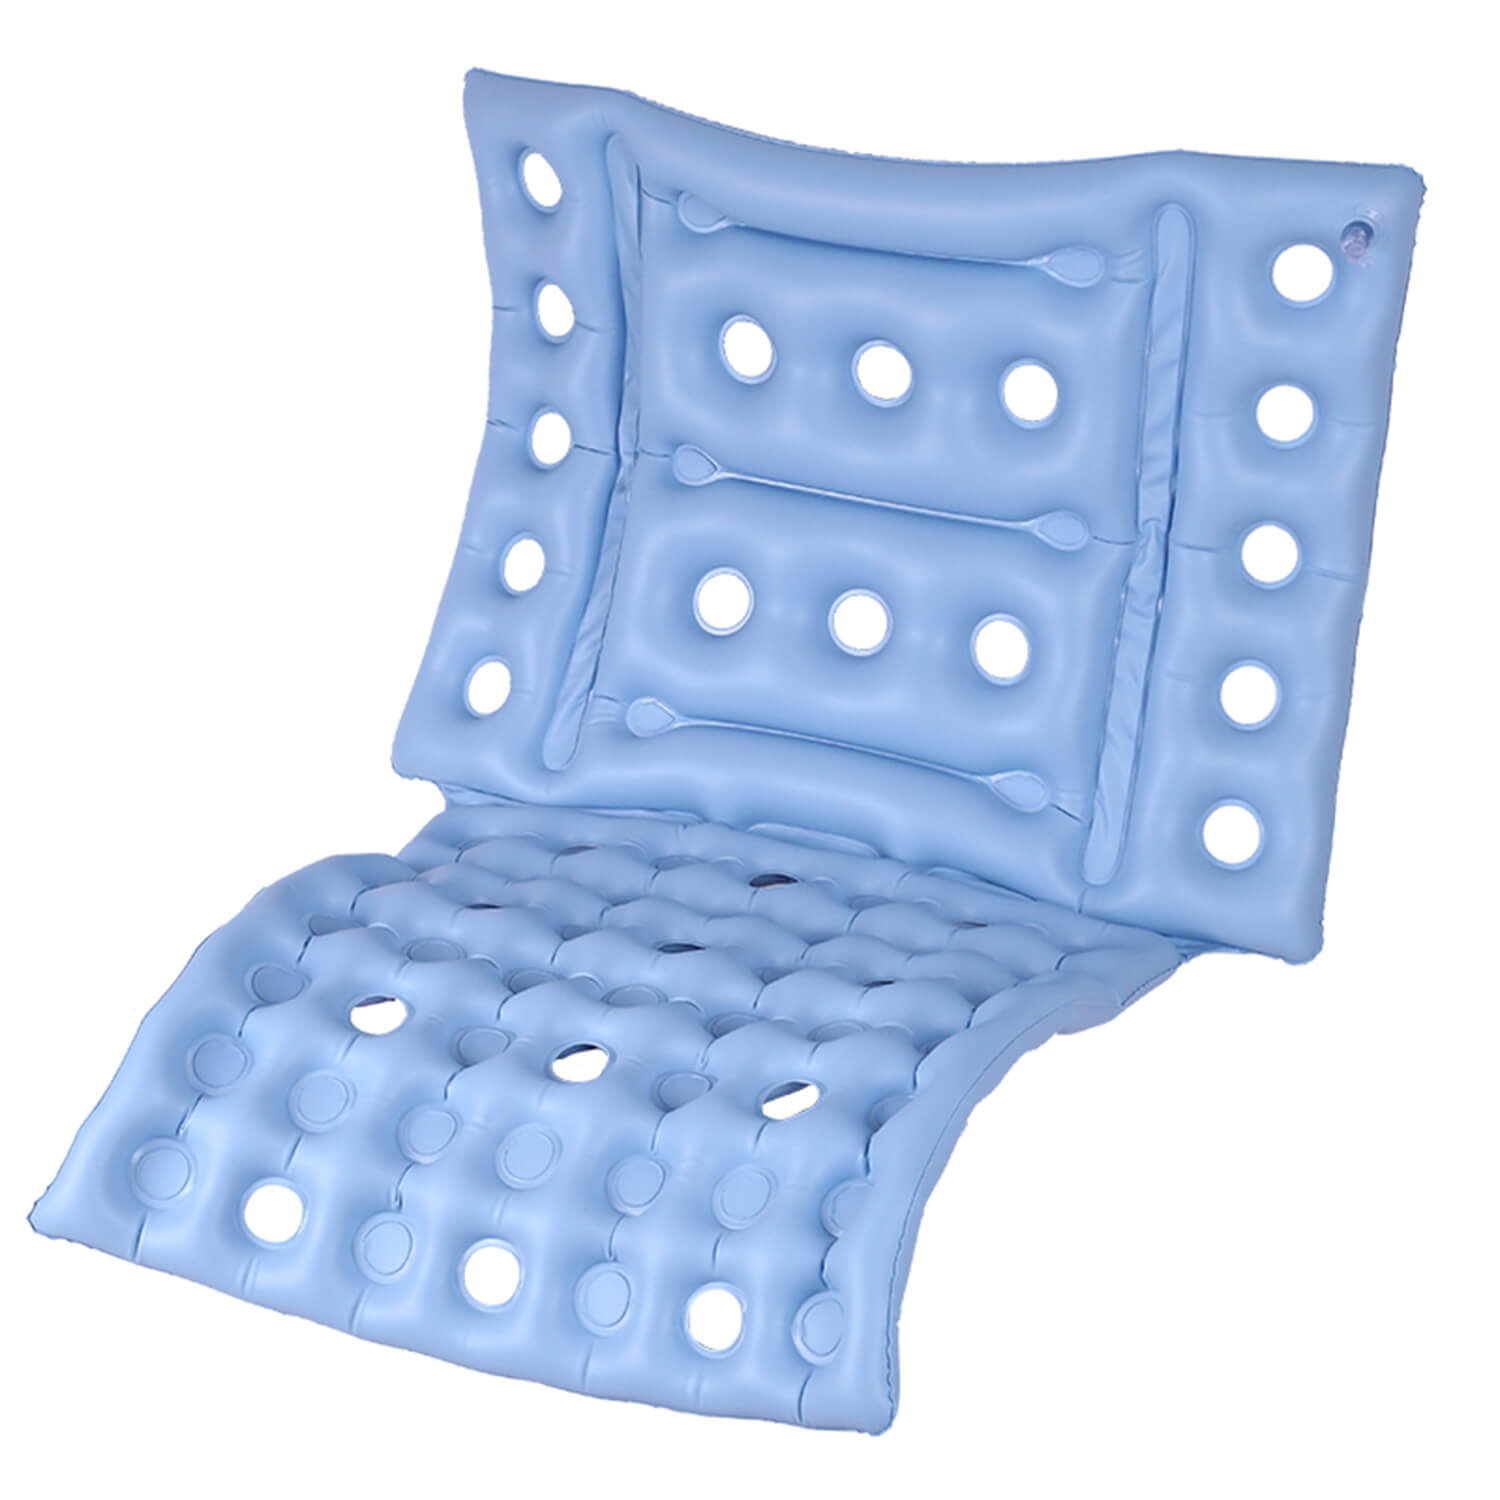 Wheelchair Cushion for Seniors Pressure Relief, Inflatable Seat